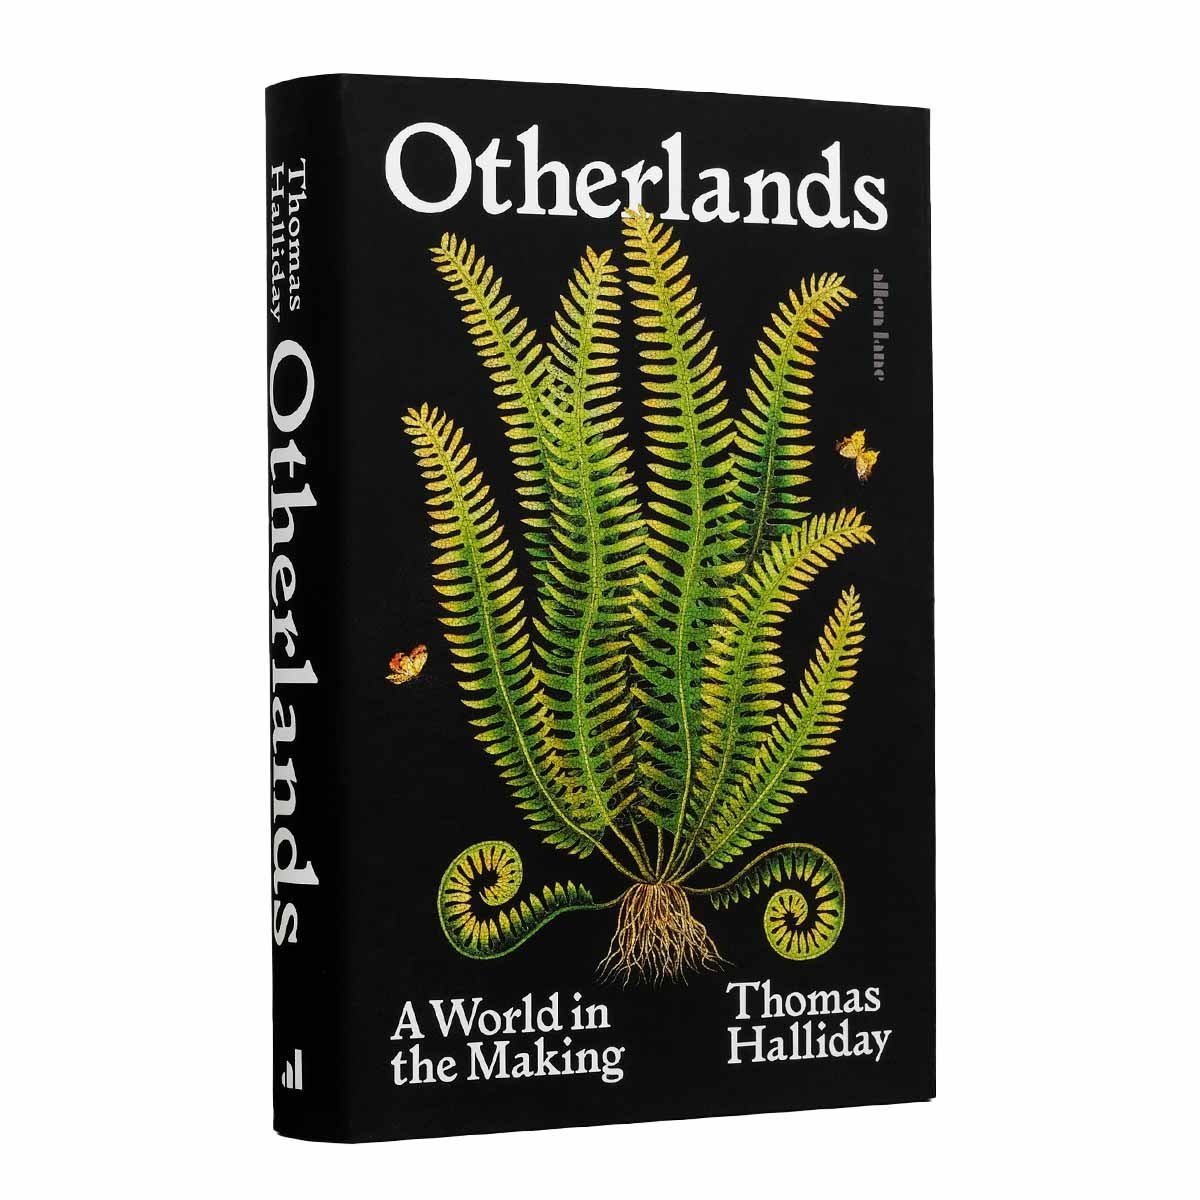 otherlands by thomas halliday